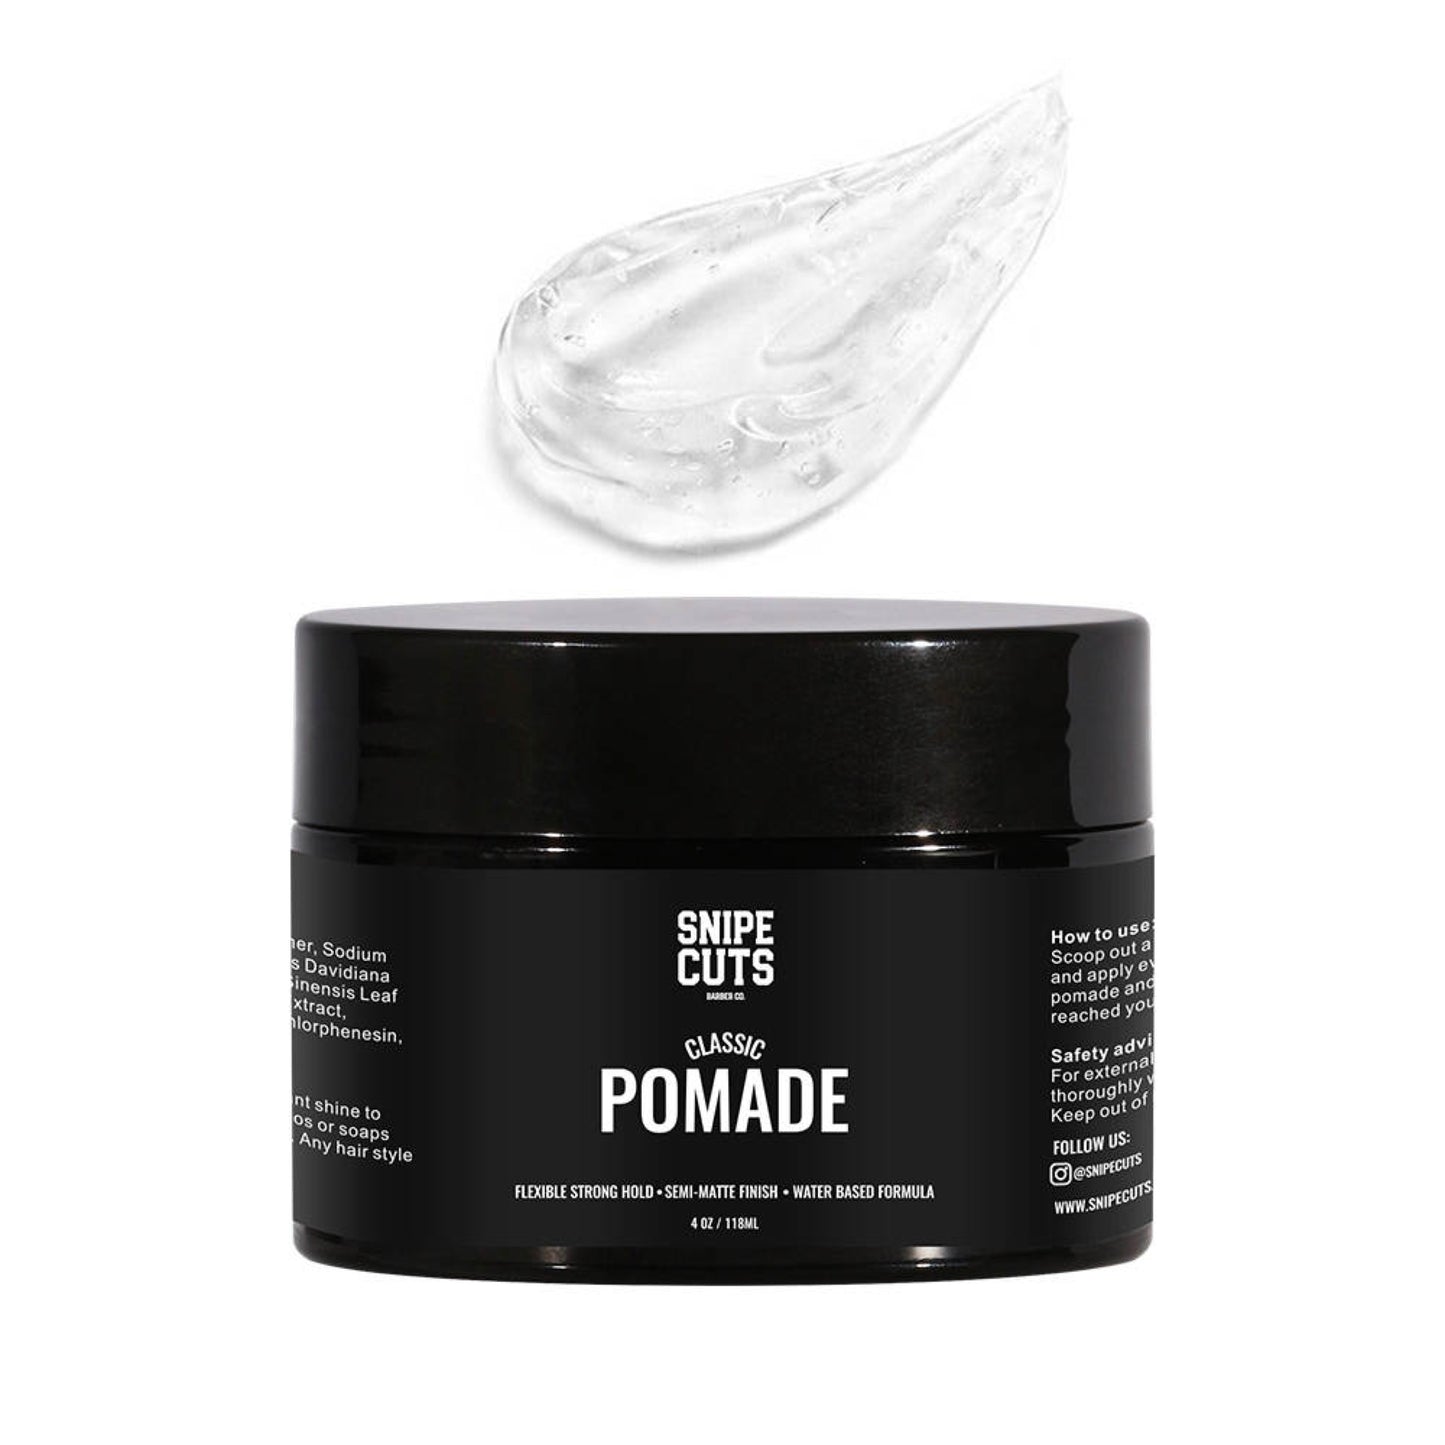 CLASSIC POMADE - FLEXIBLE STRONG HOLD